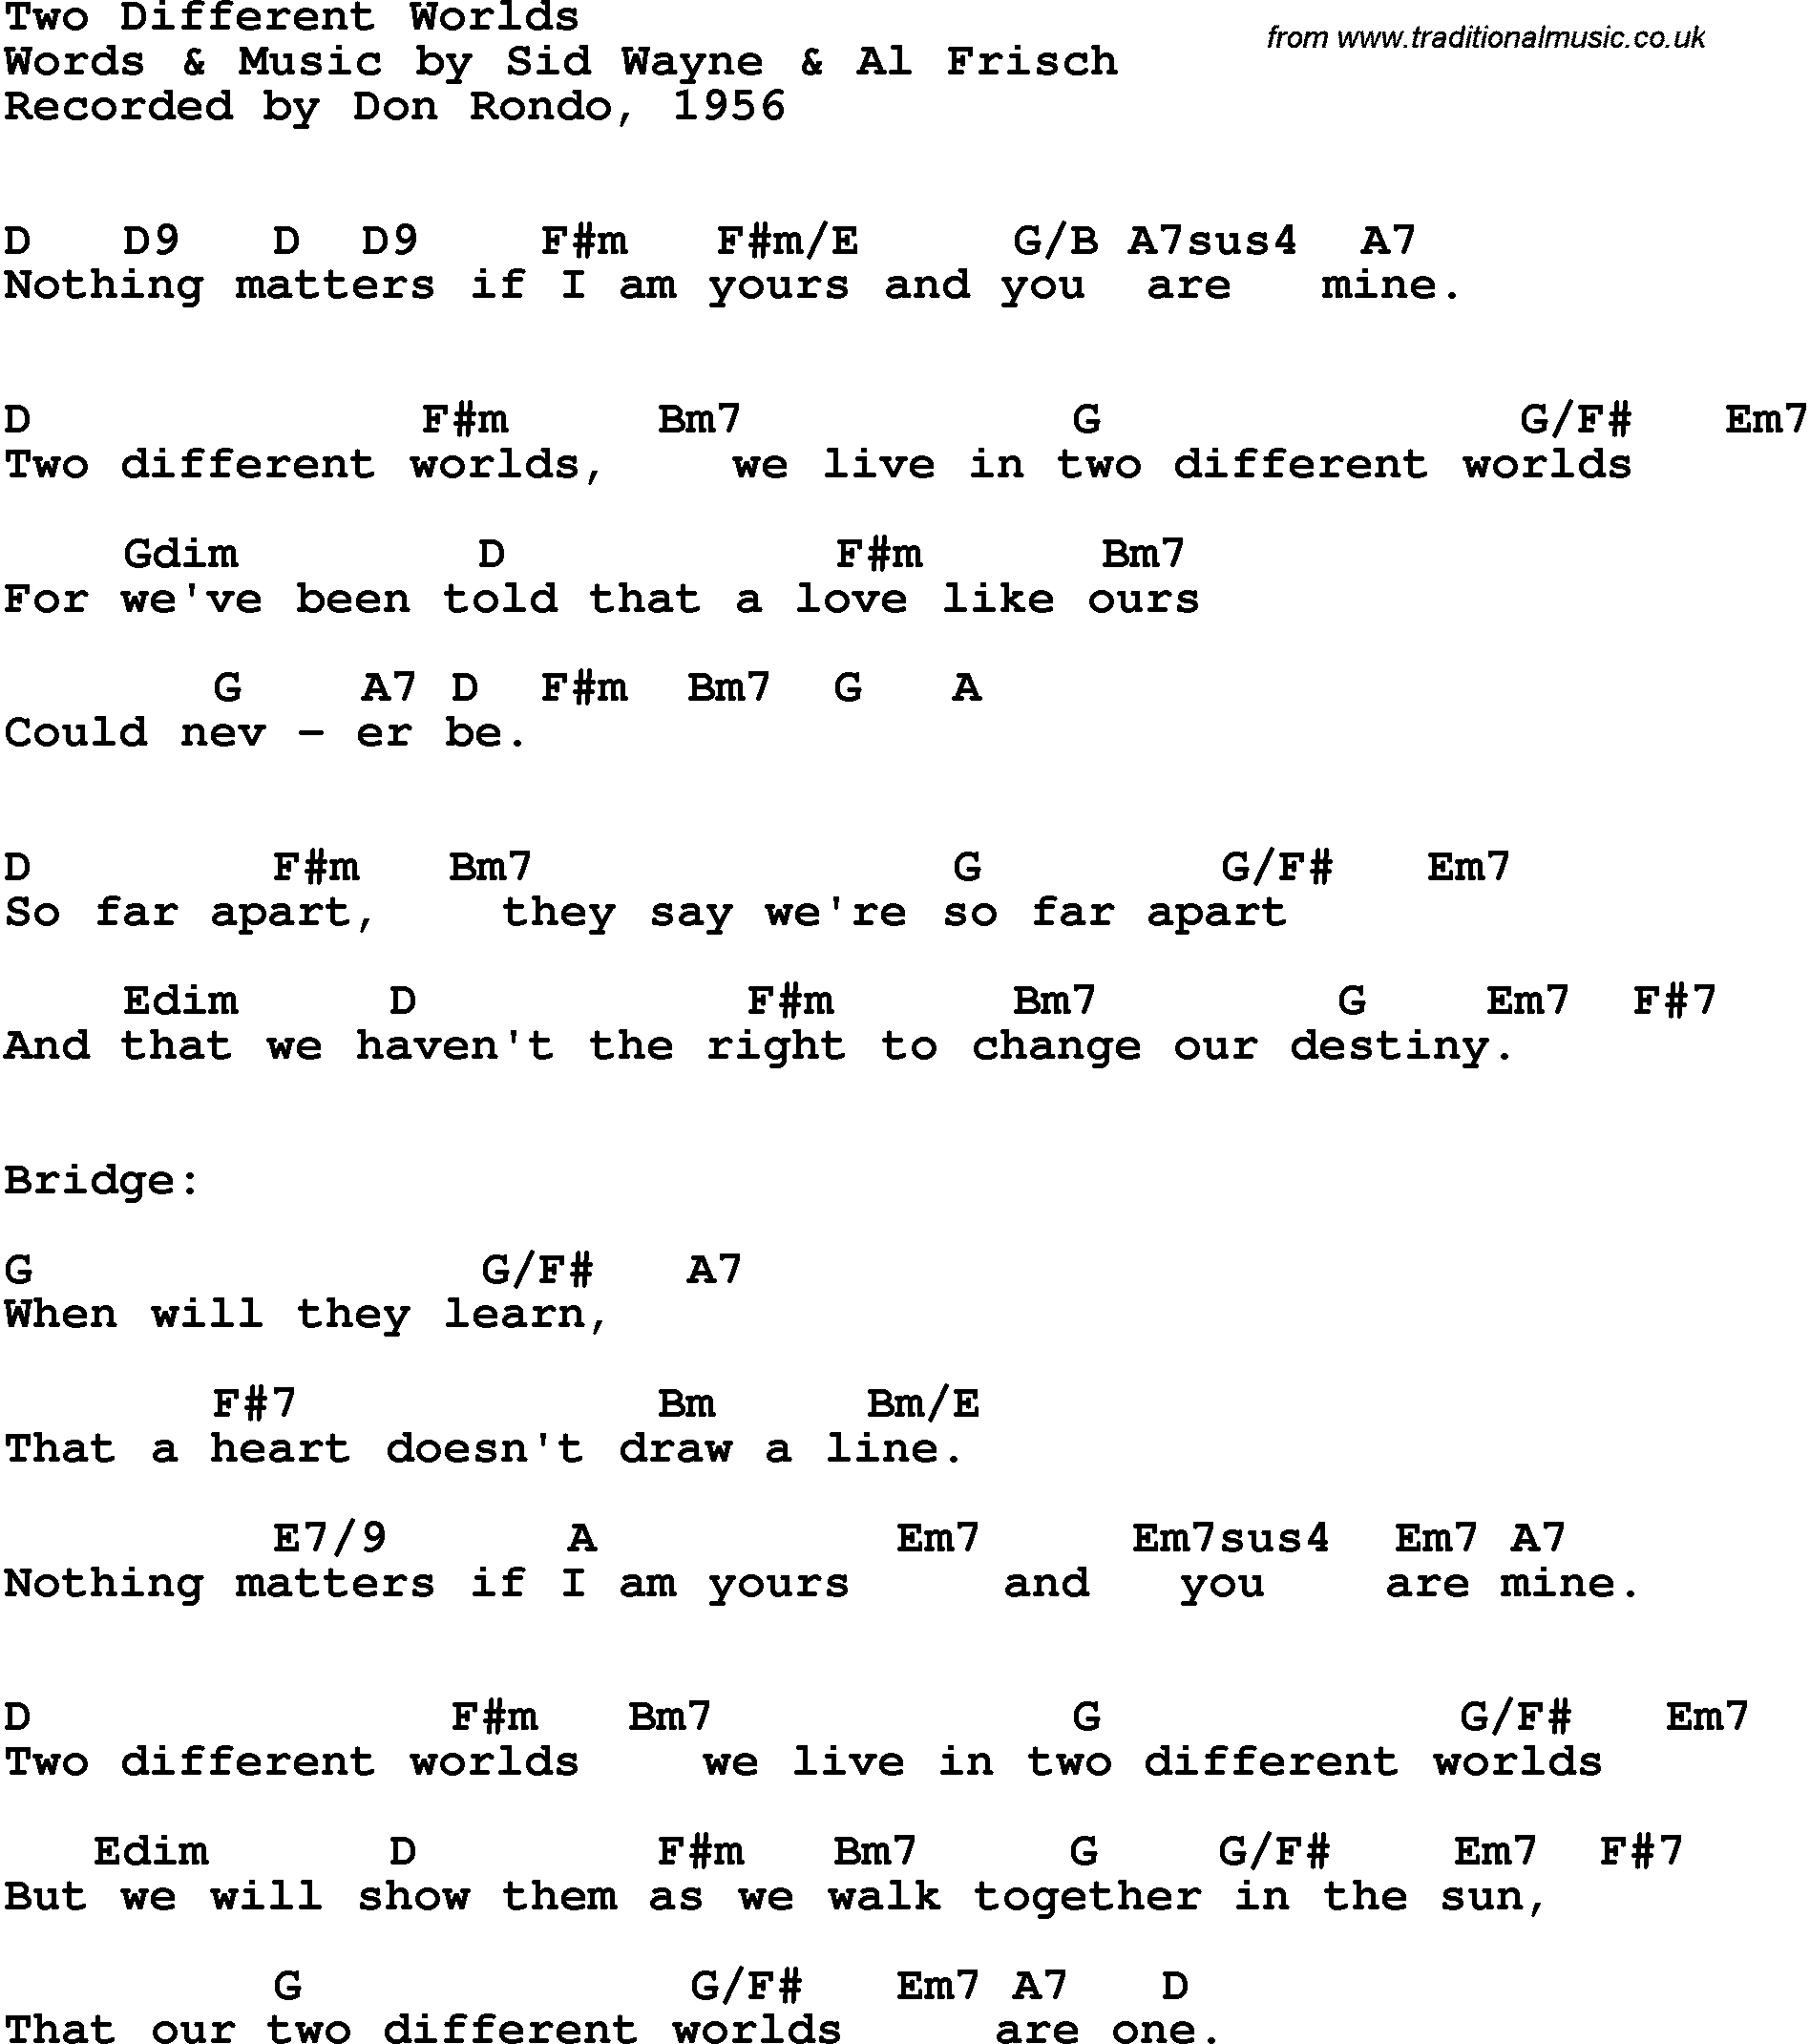 Song Lyrics with guitar chords for Two Different Worlds - Don Rondo, 1956